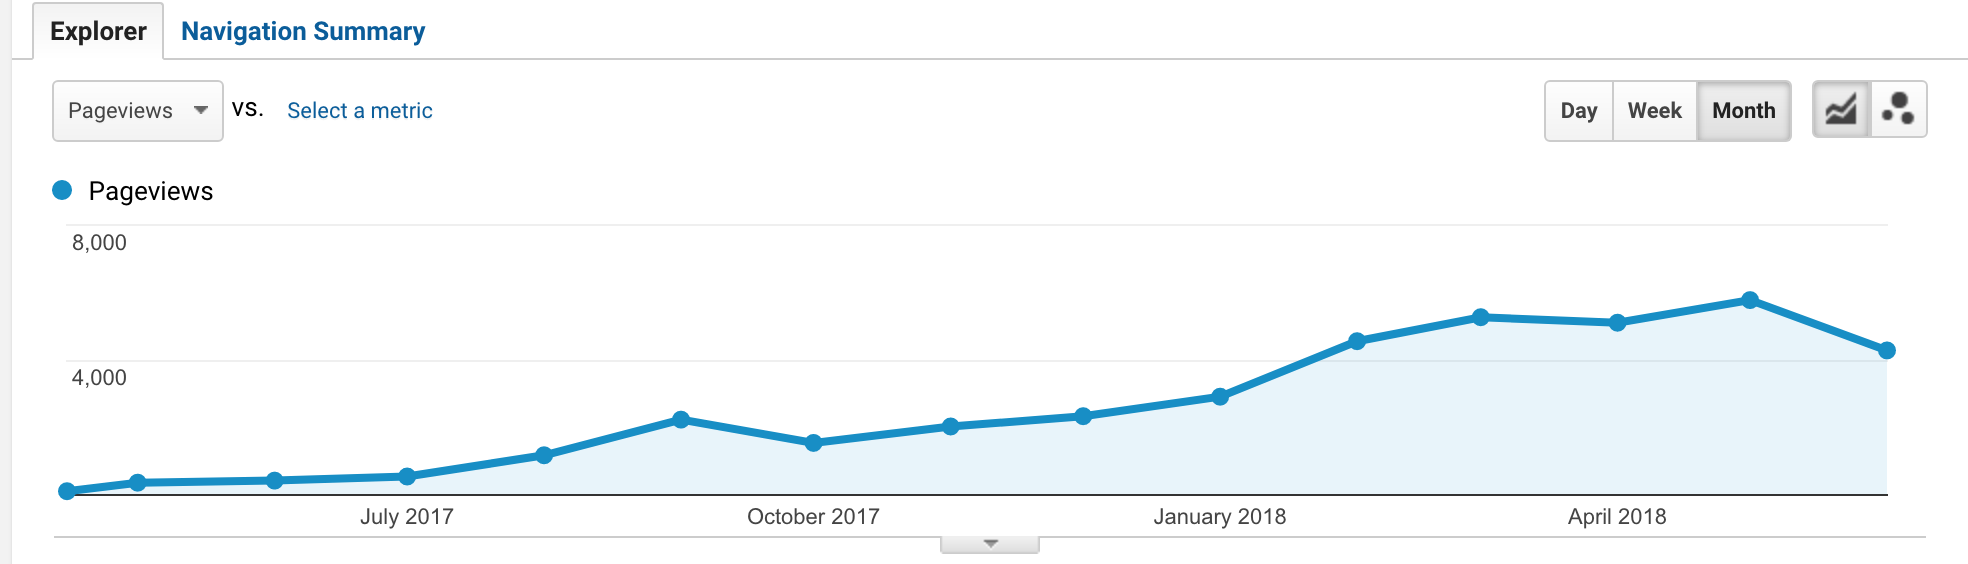 traffic growth with content marketing